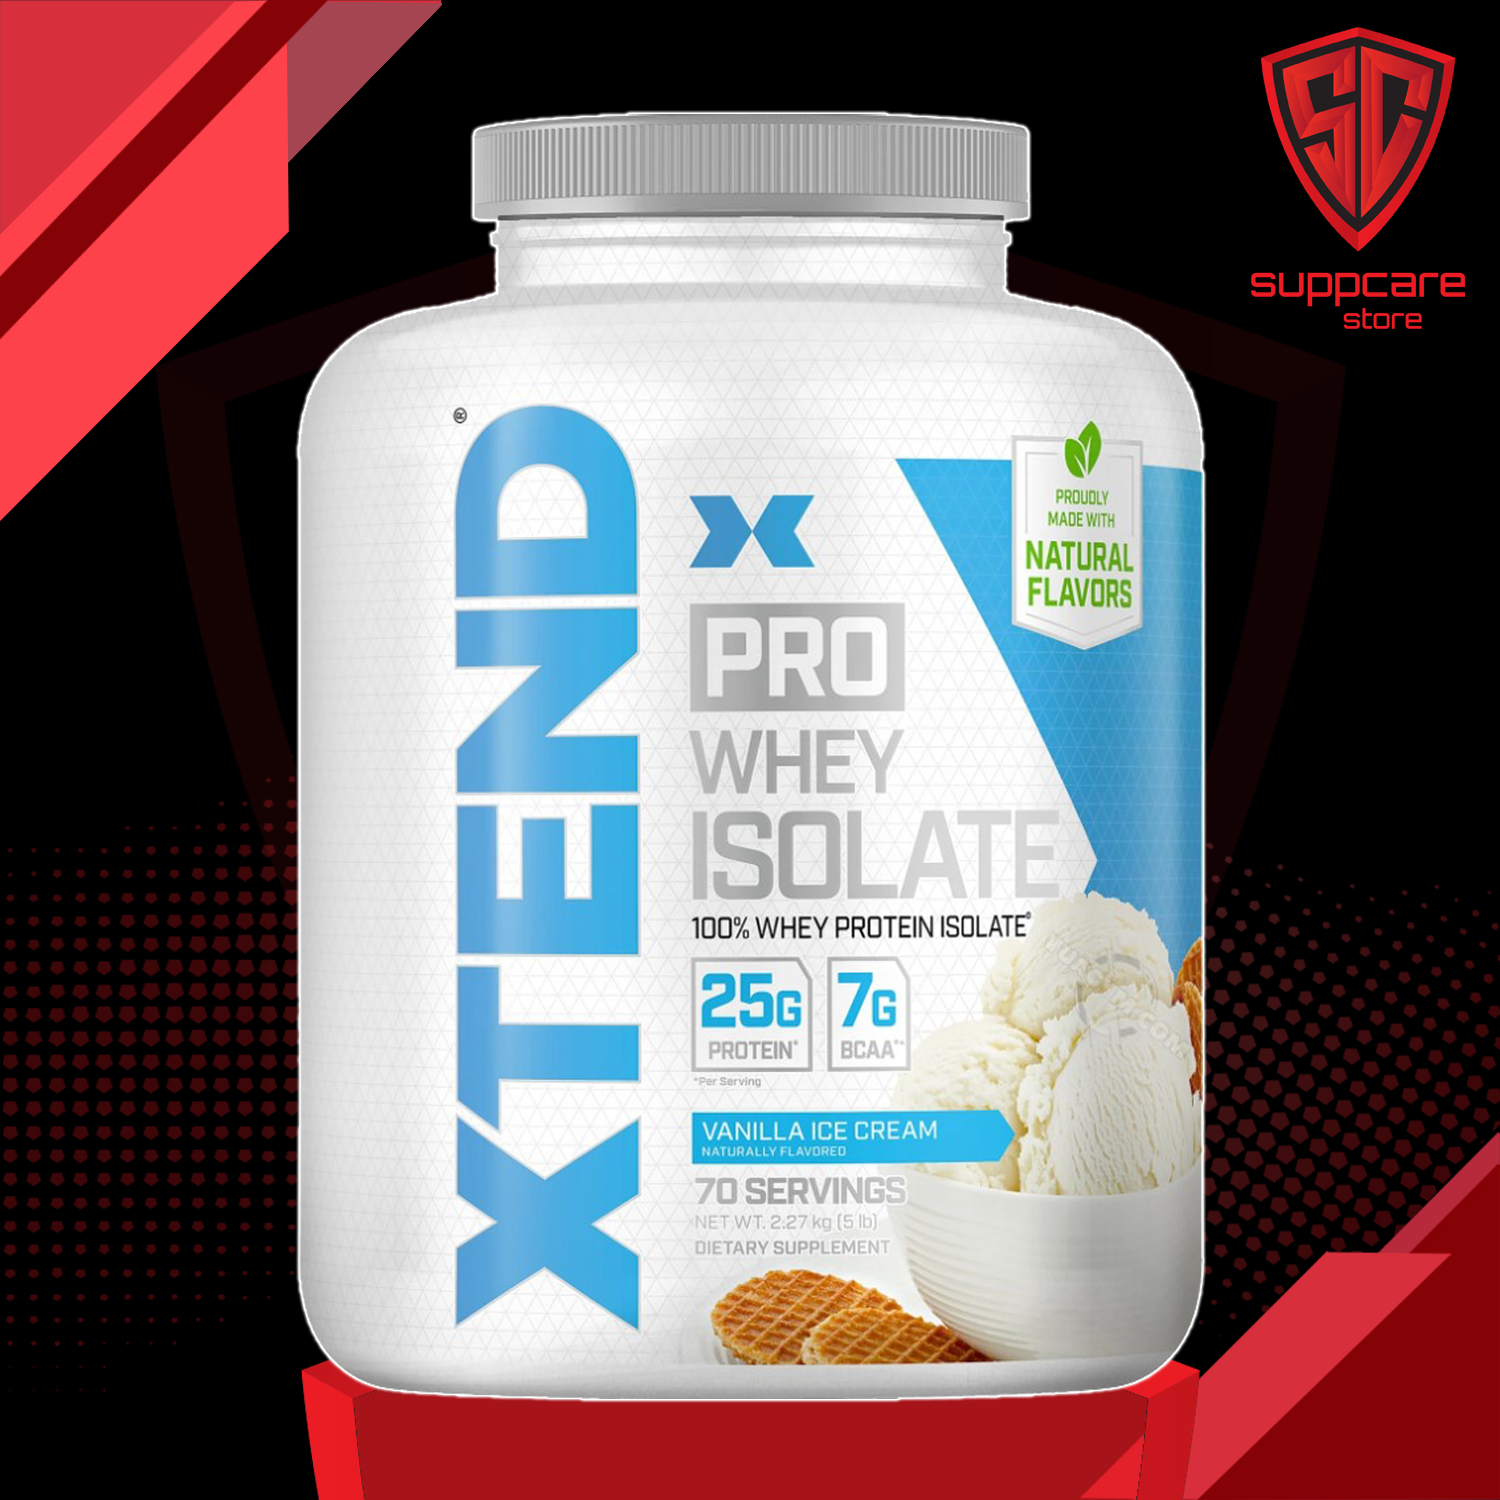 WHEY ISOLATE - Scivation Xtend Pro Whey Isolate 5 lbs Sữa Tăng Cơ 70 Lần